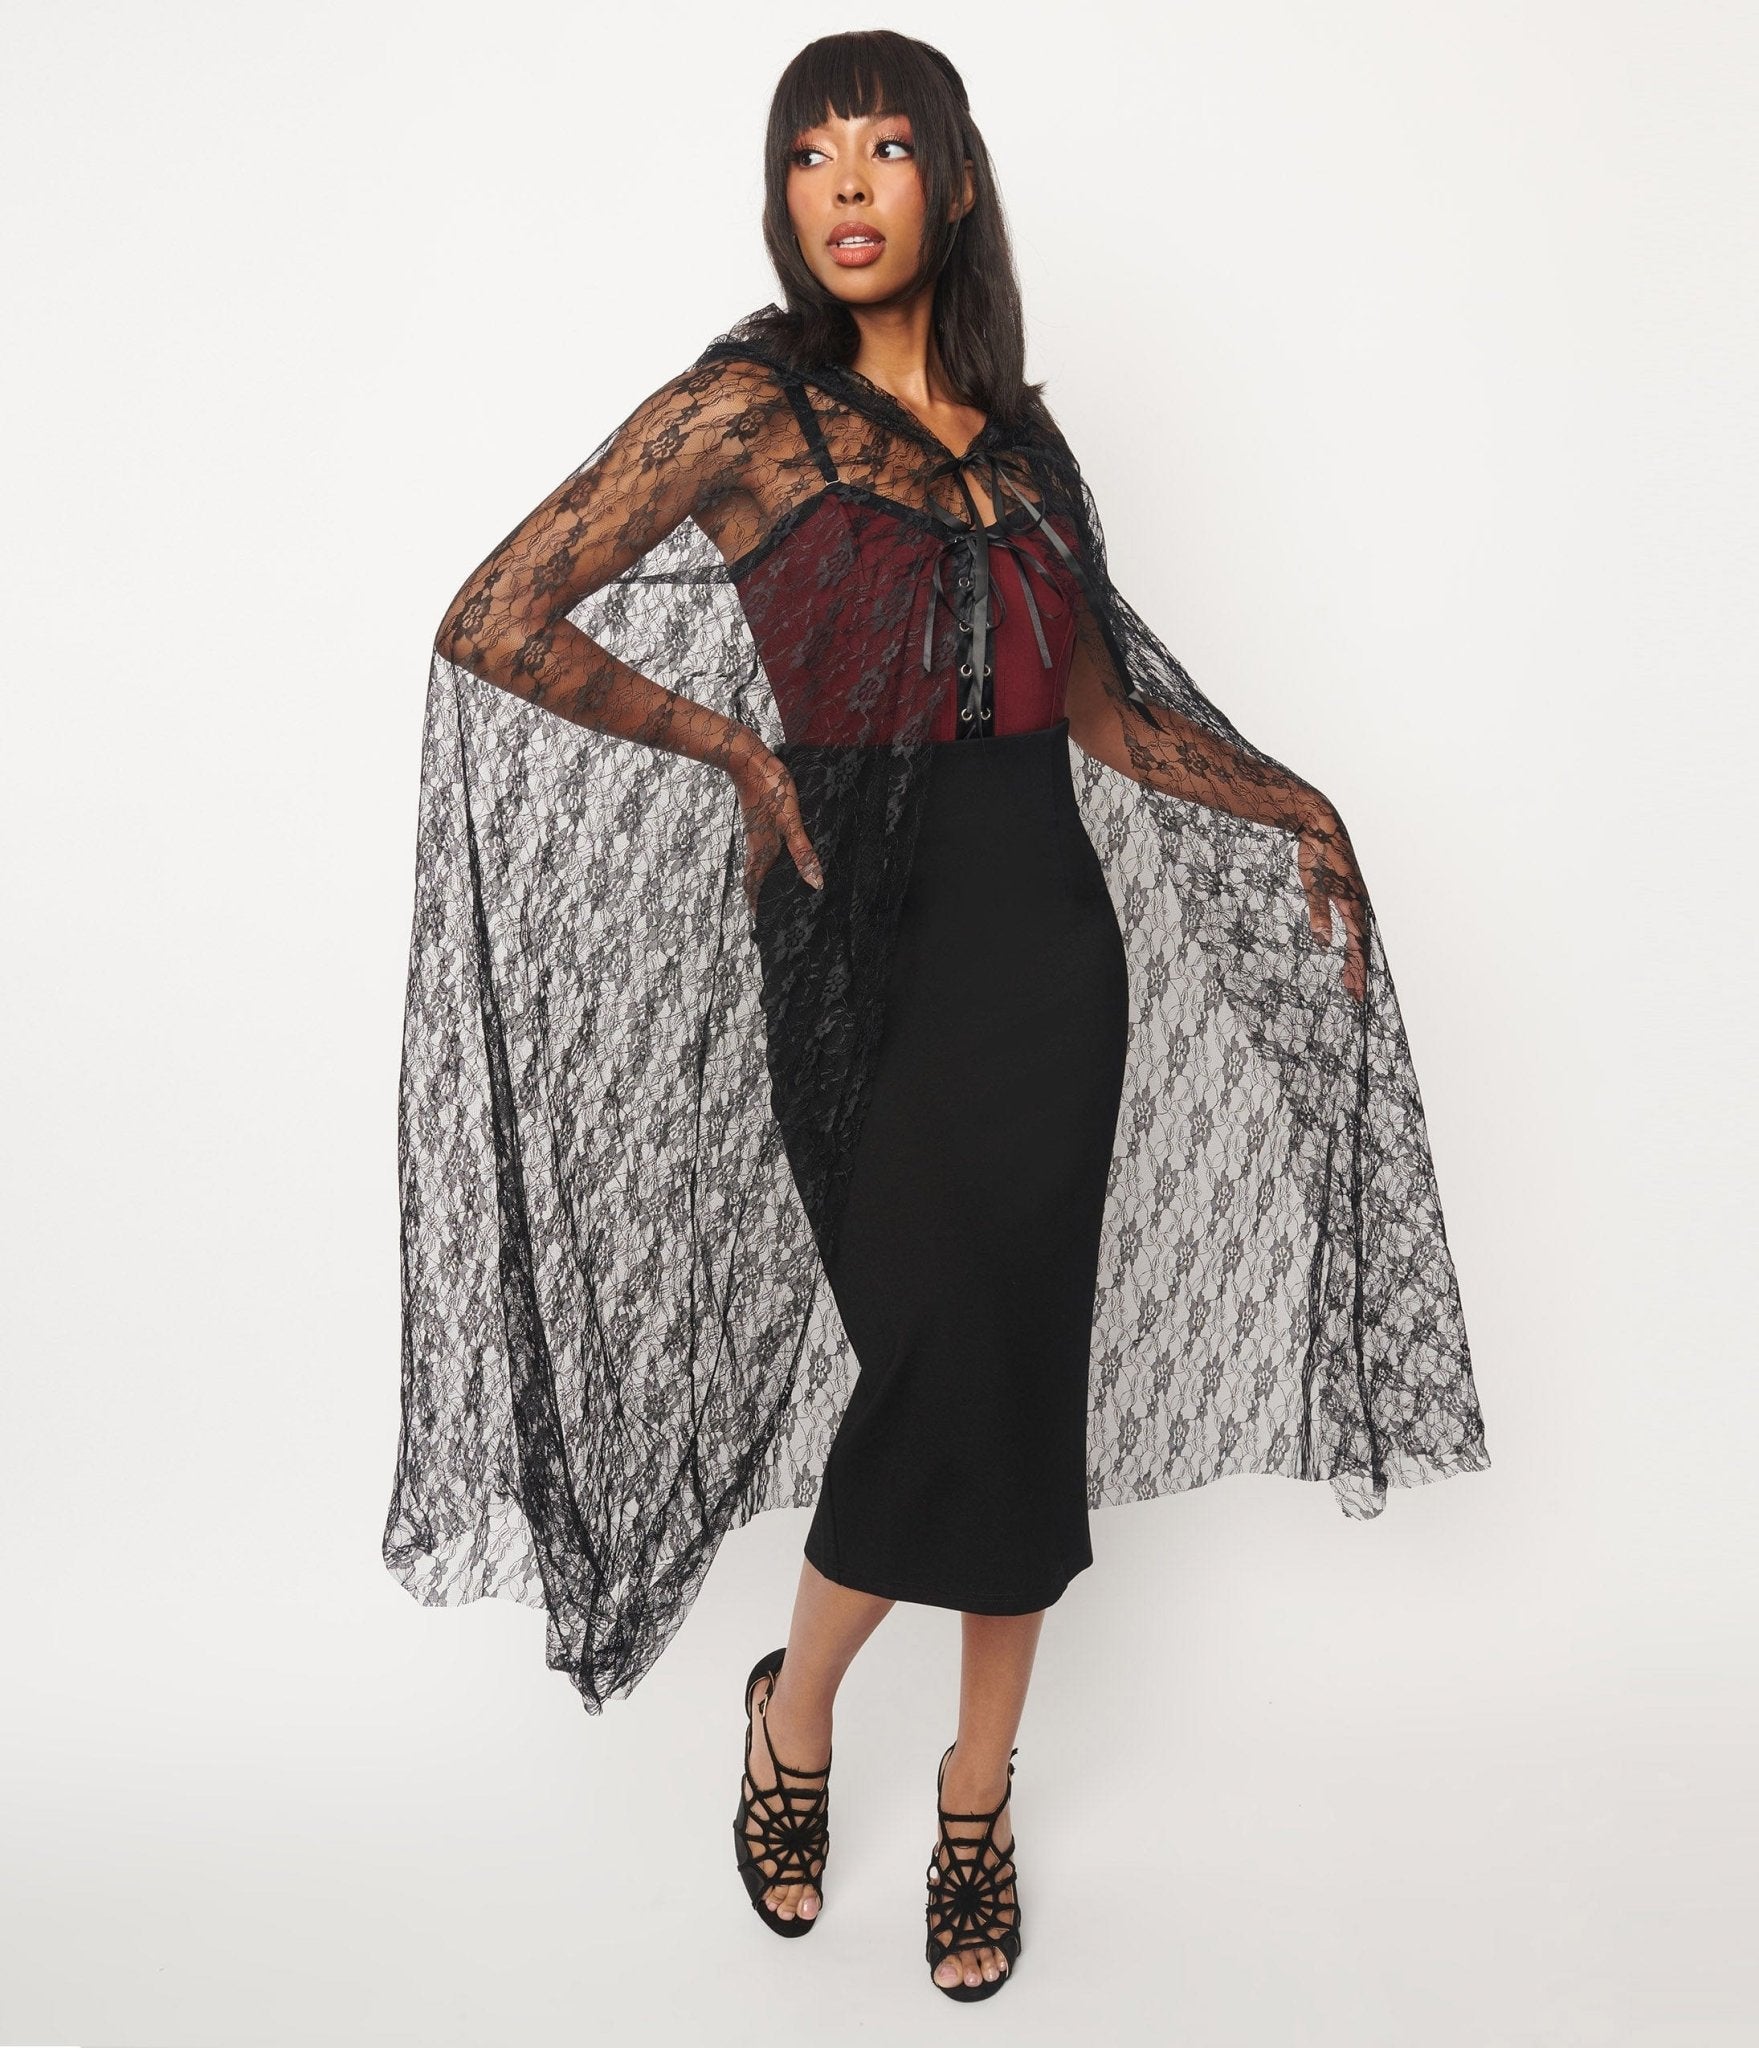 

Black Lace Hooded Cape